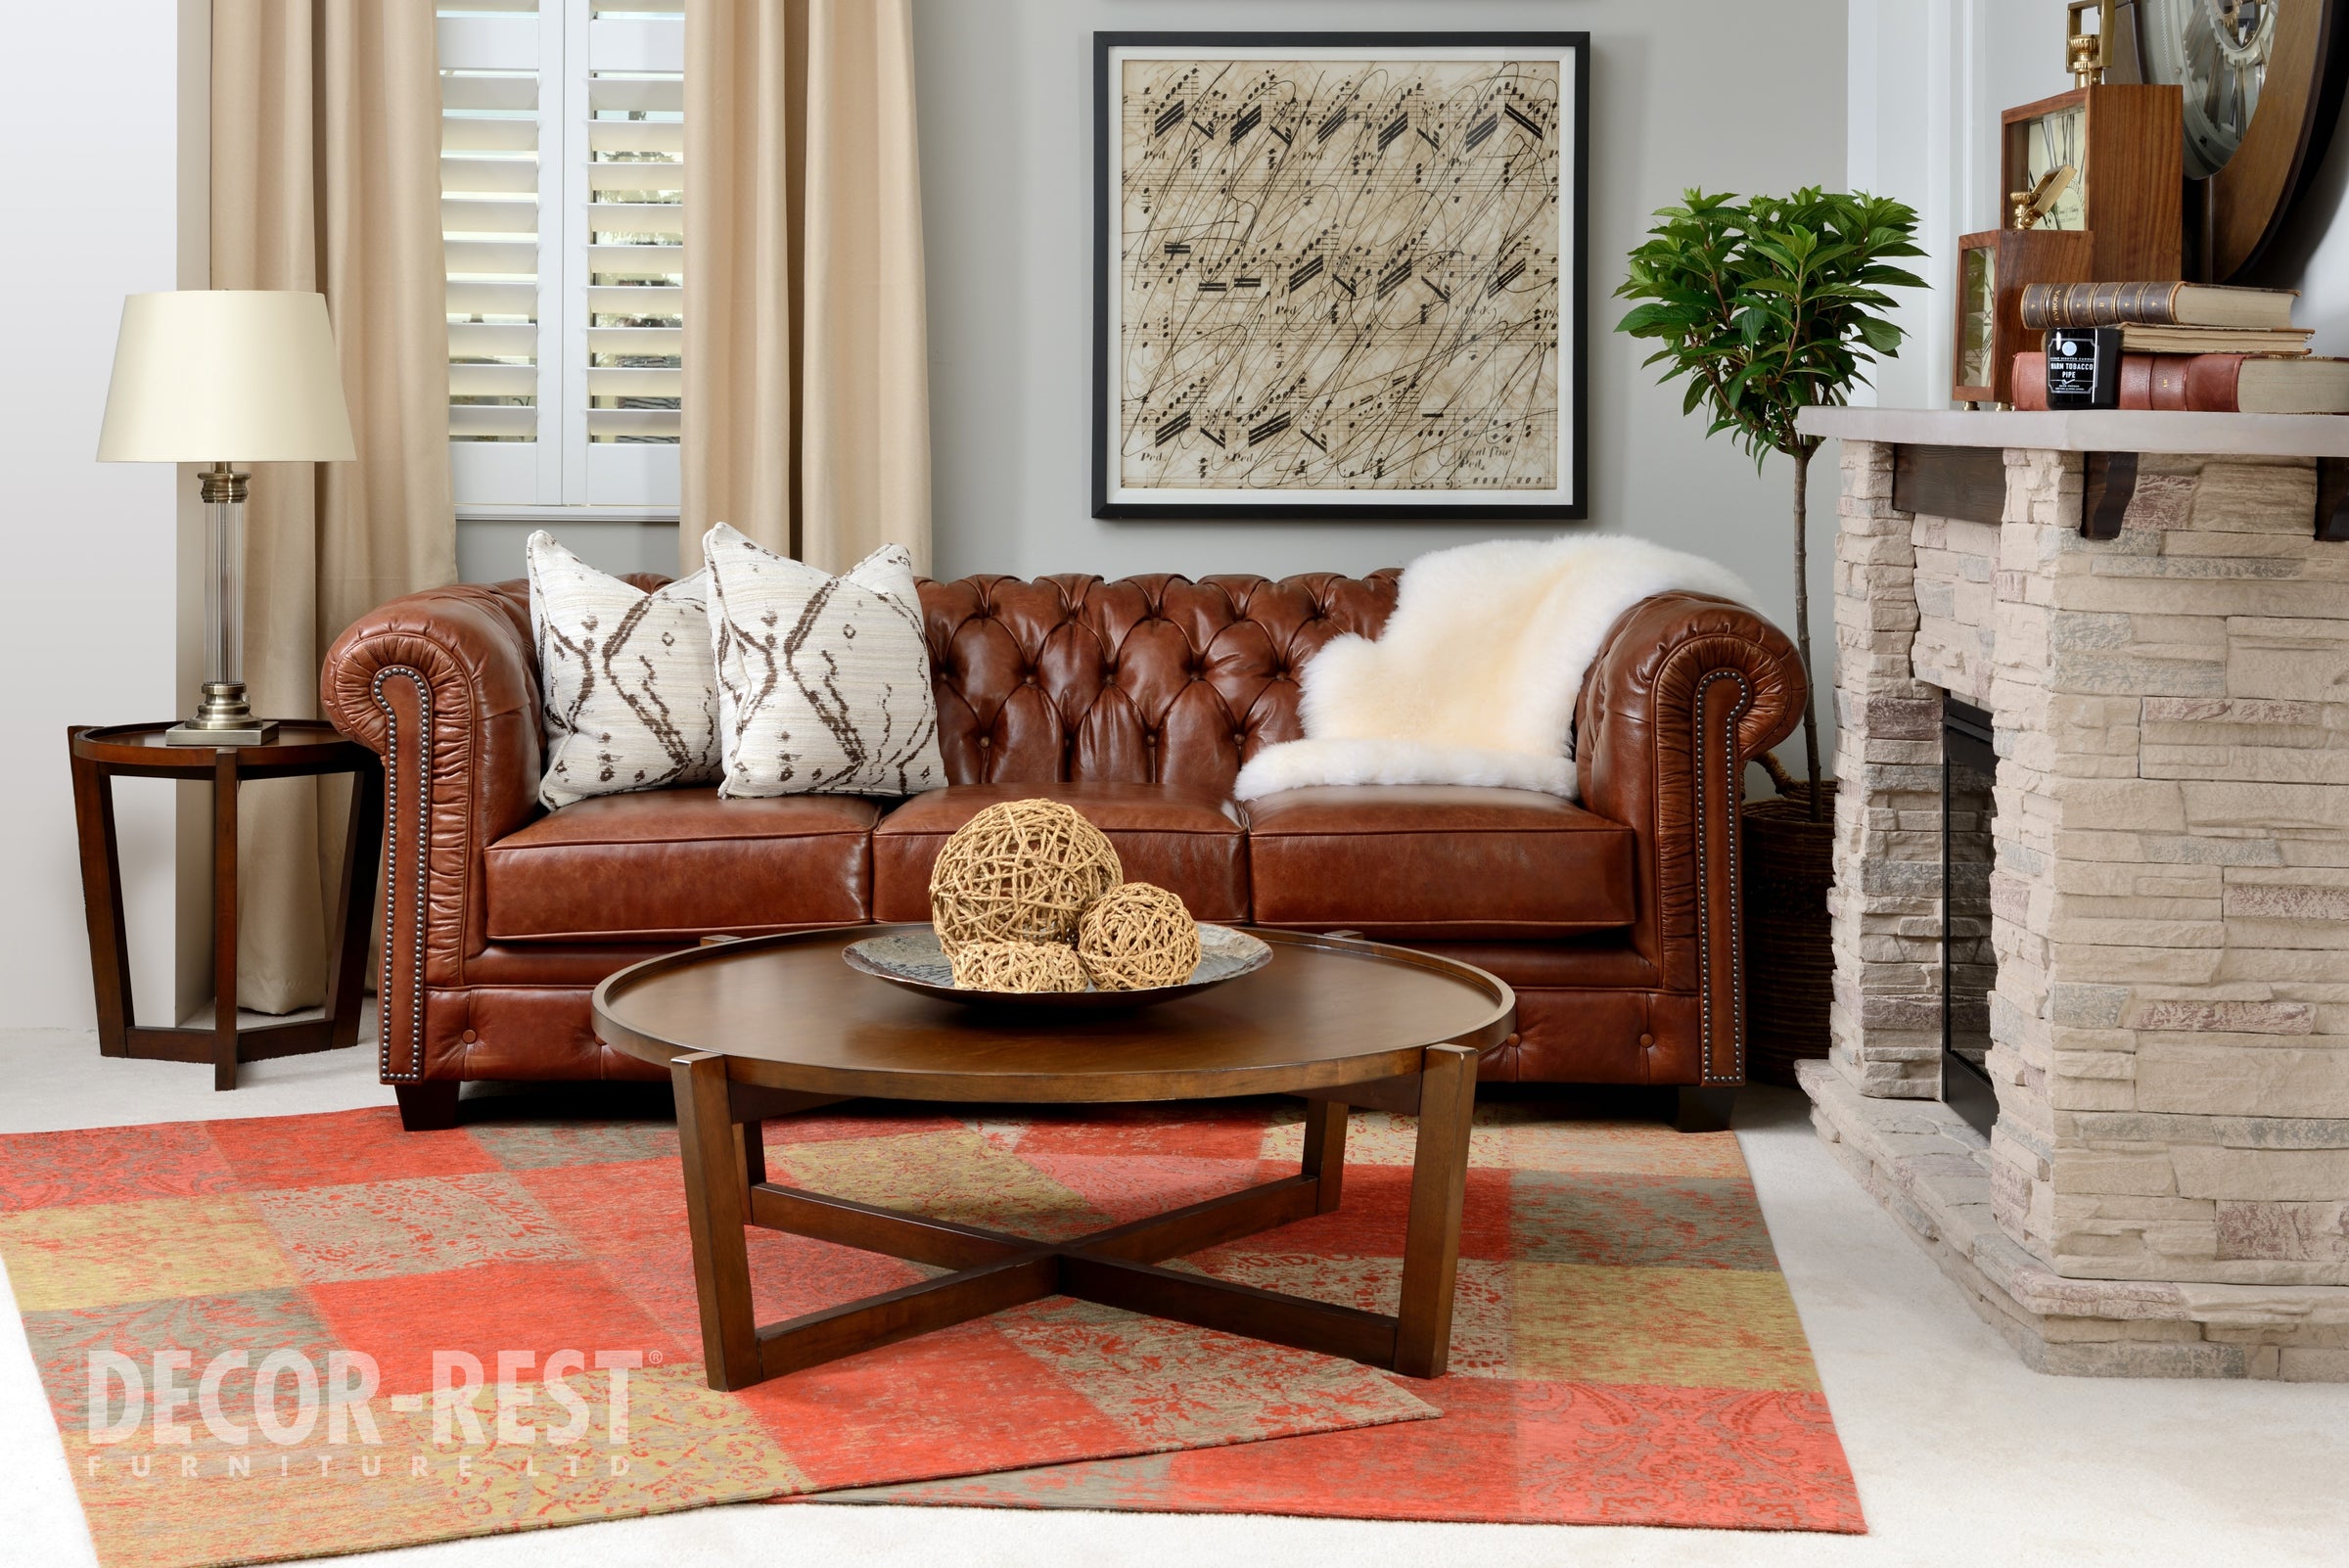 Decor Rest tufted brown leather sofa